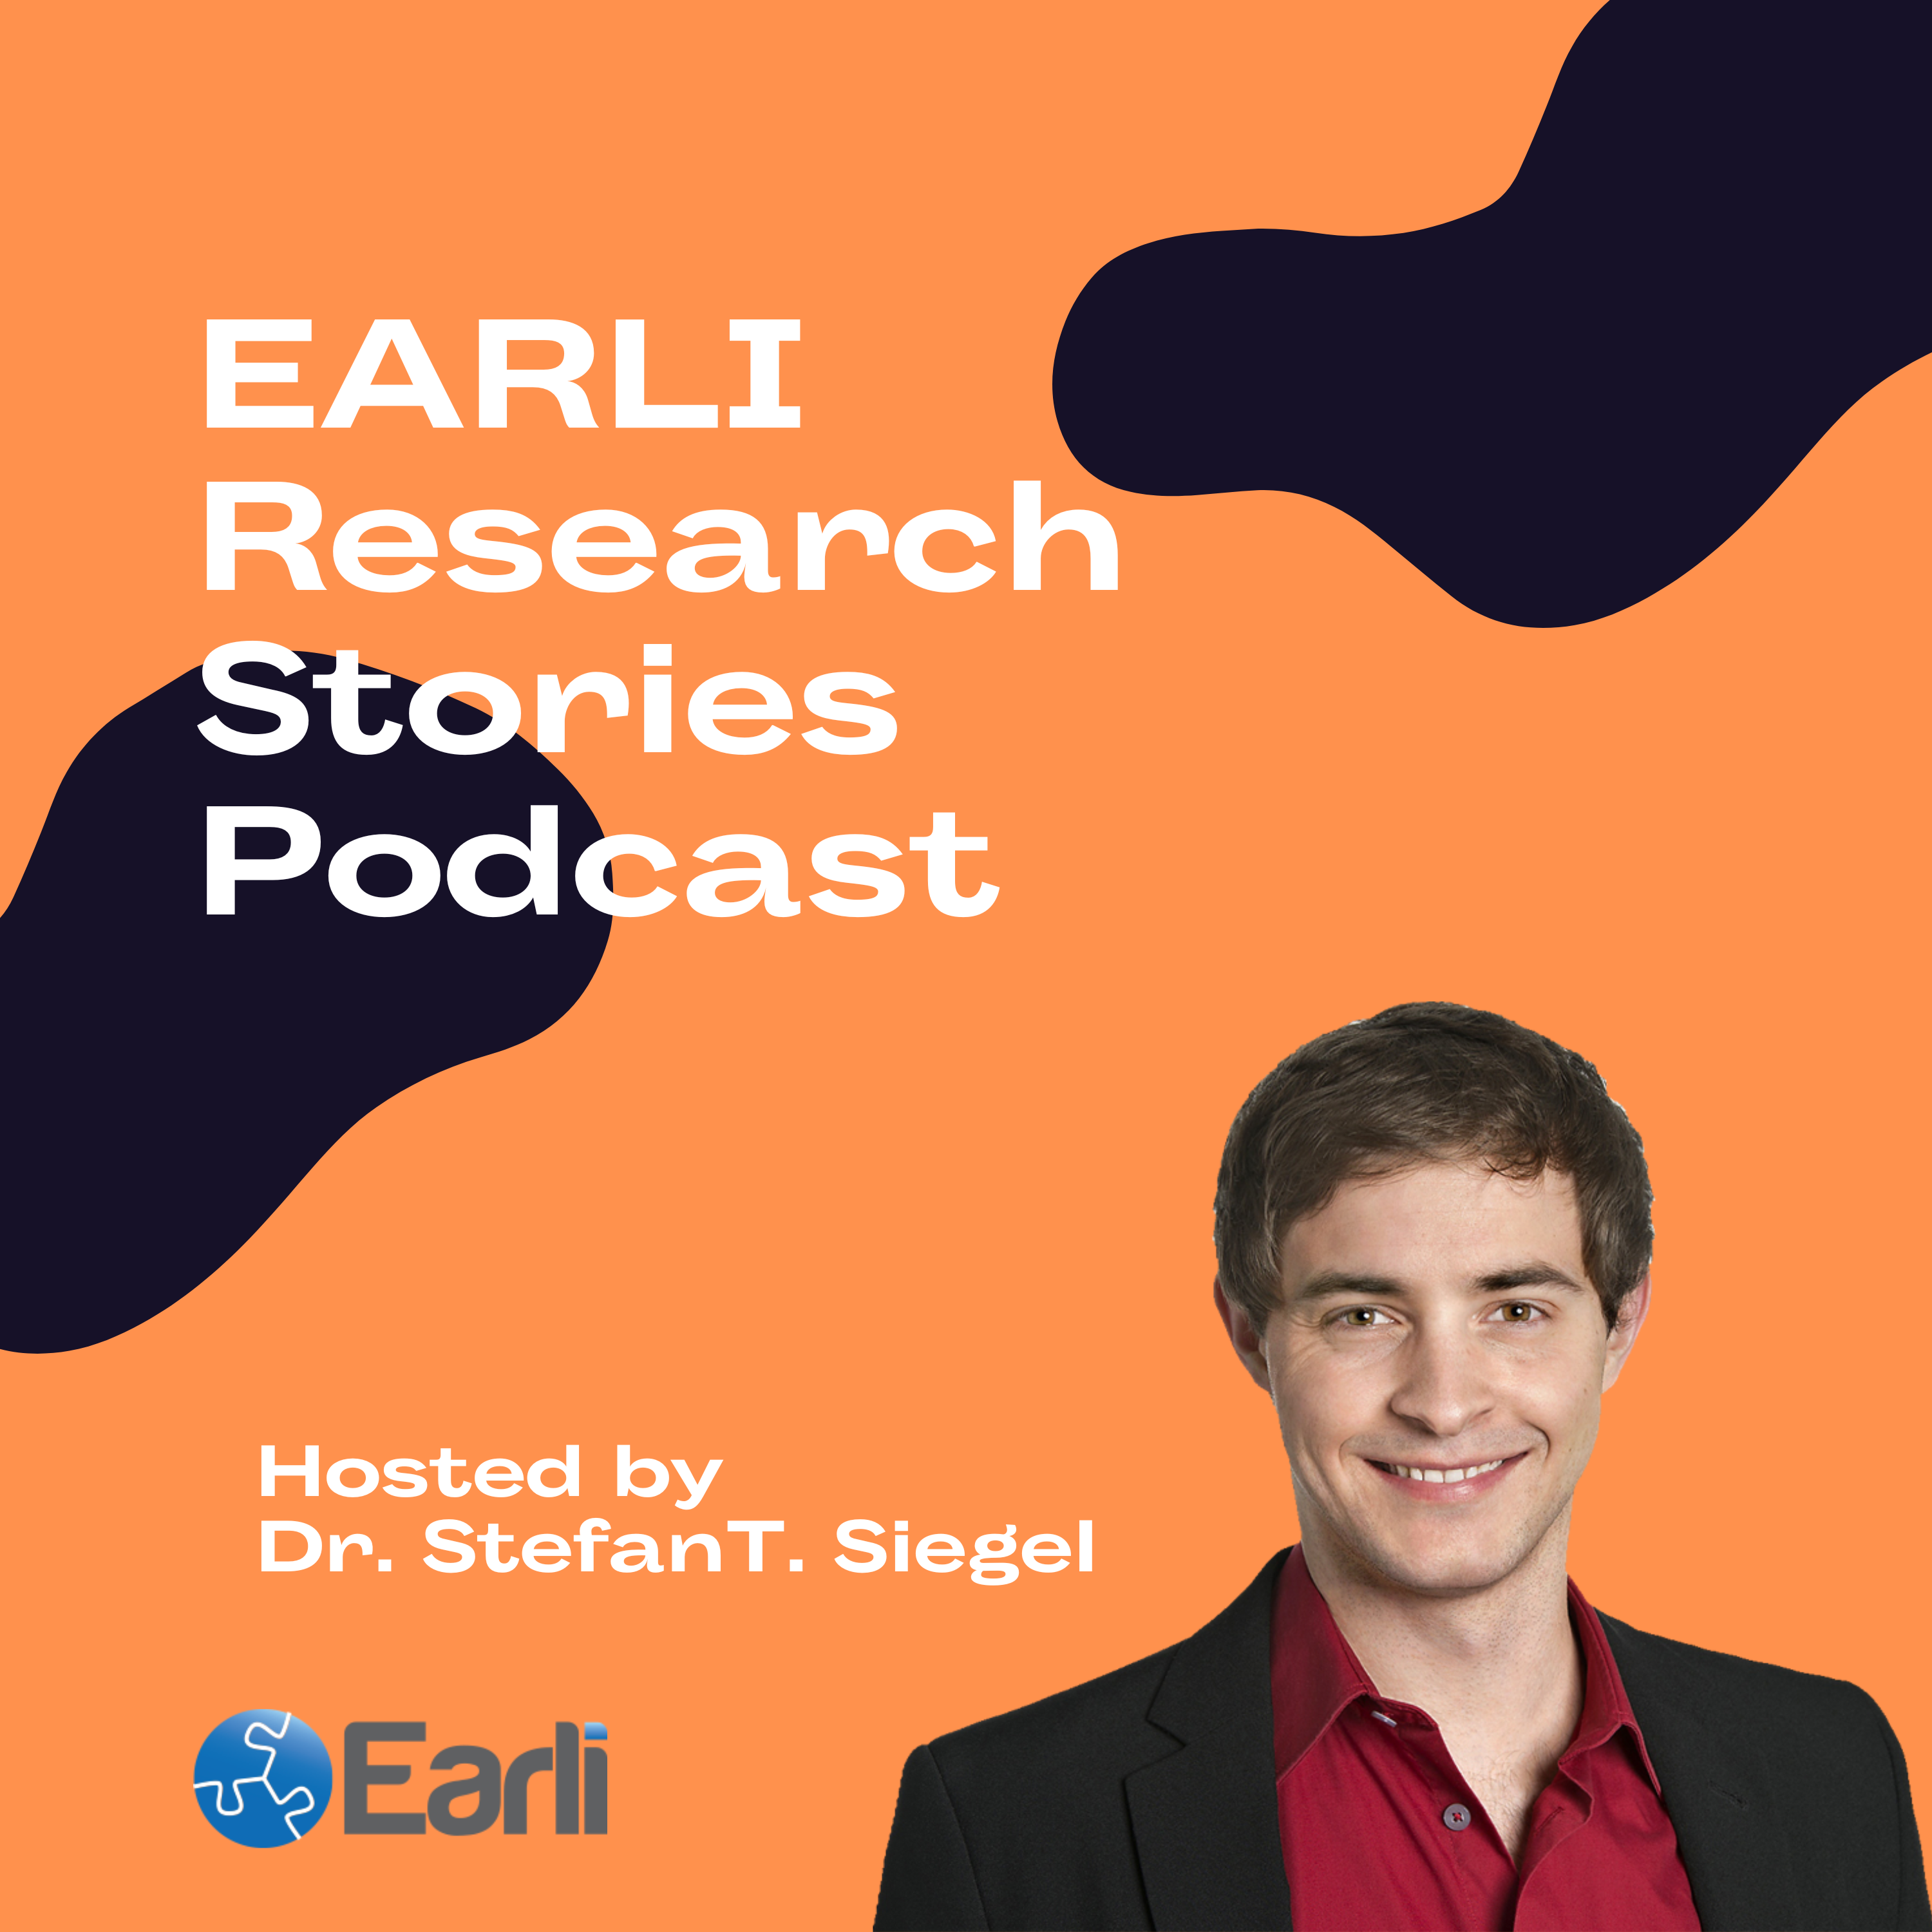 EARLI Research Stories Podcast